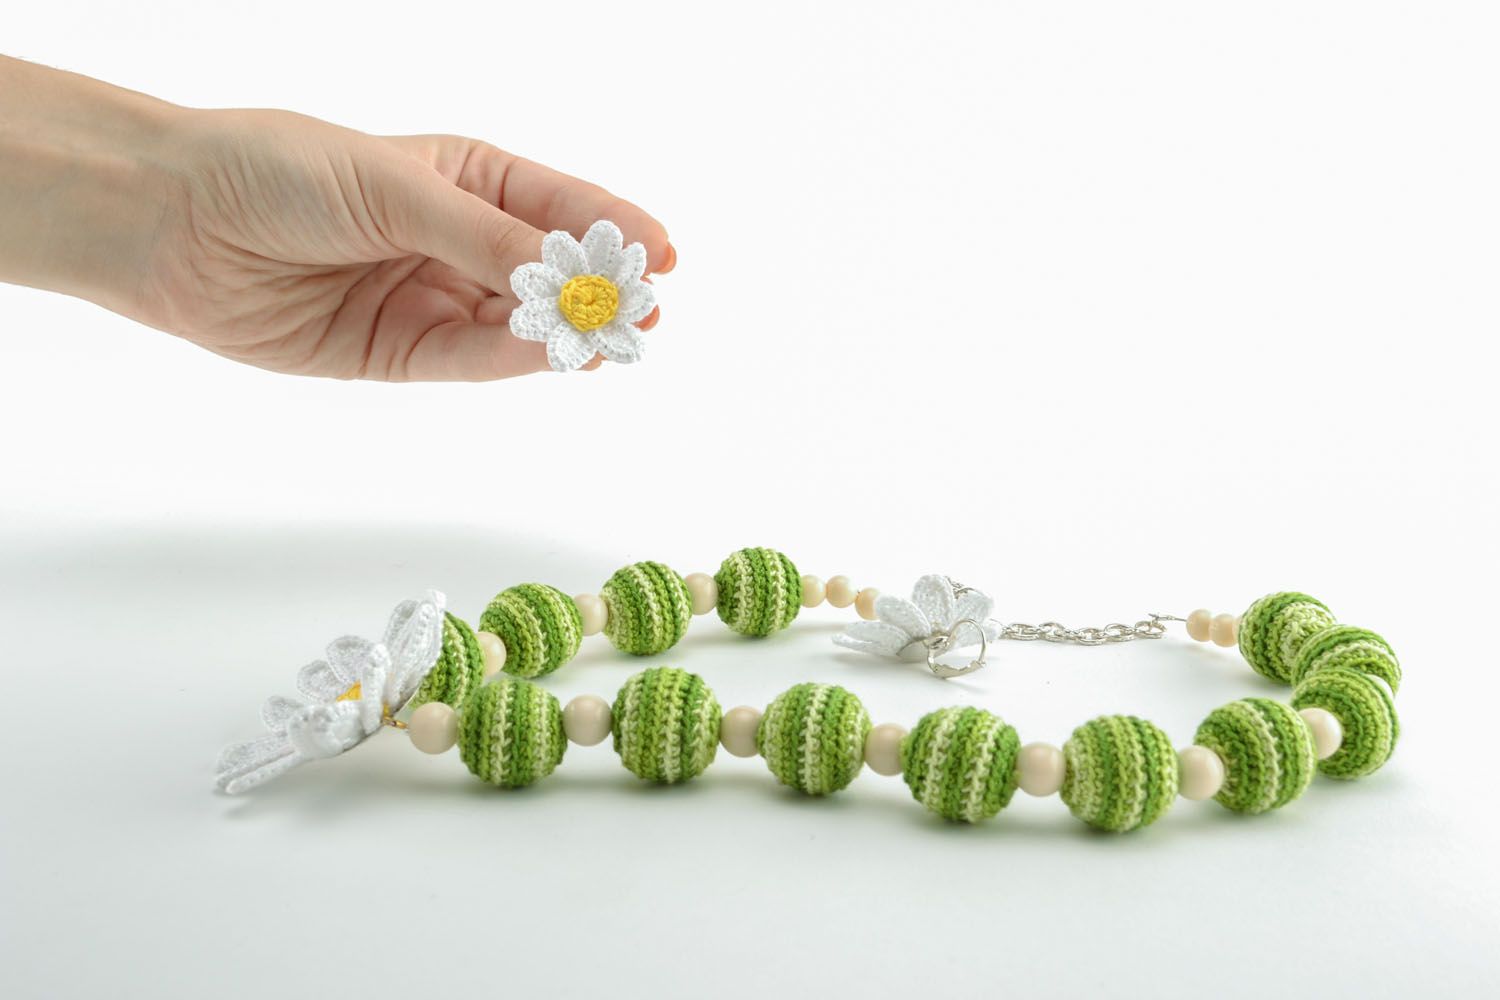 Homemade crochet bead necklace and earrings photo 4